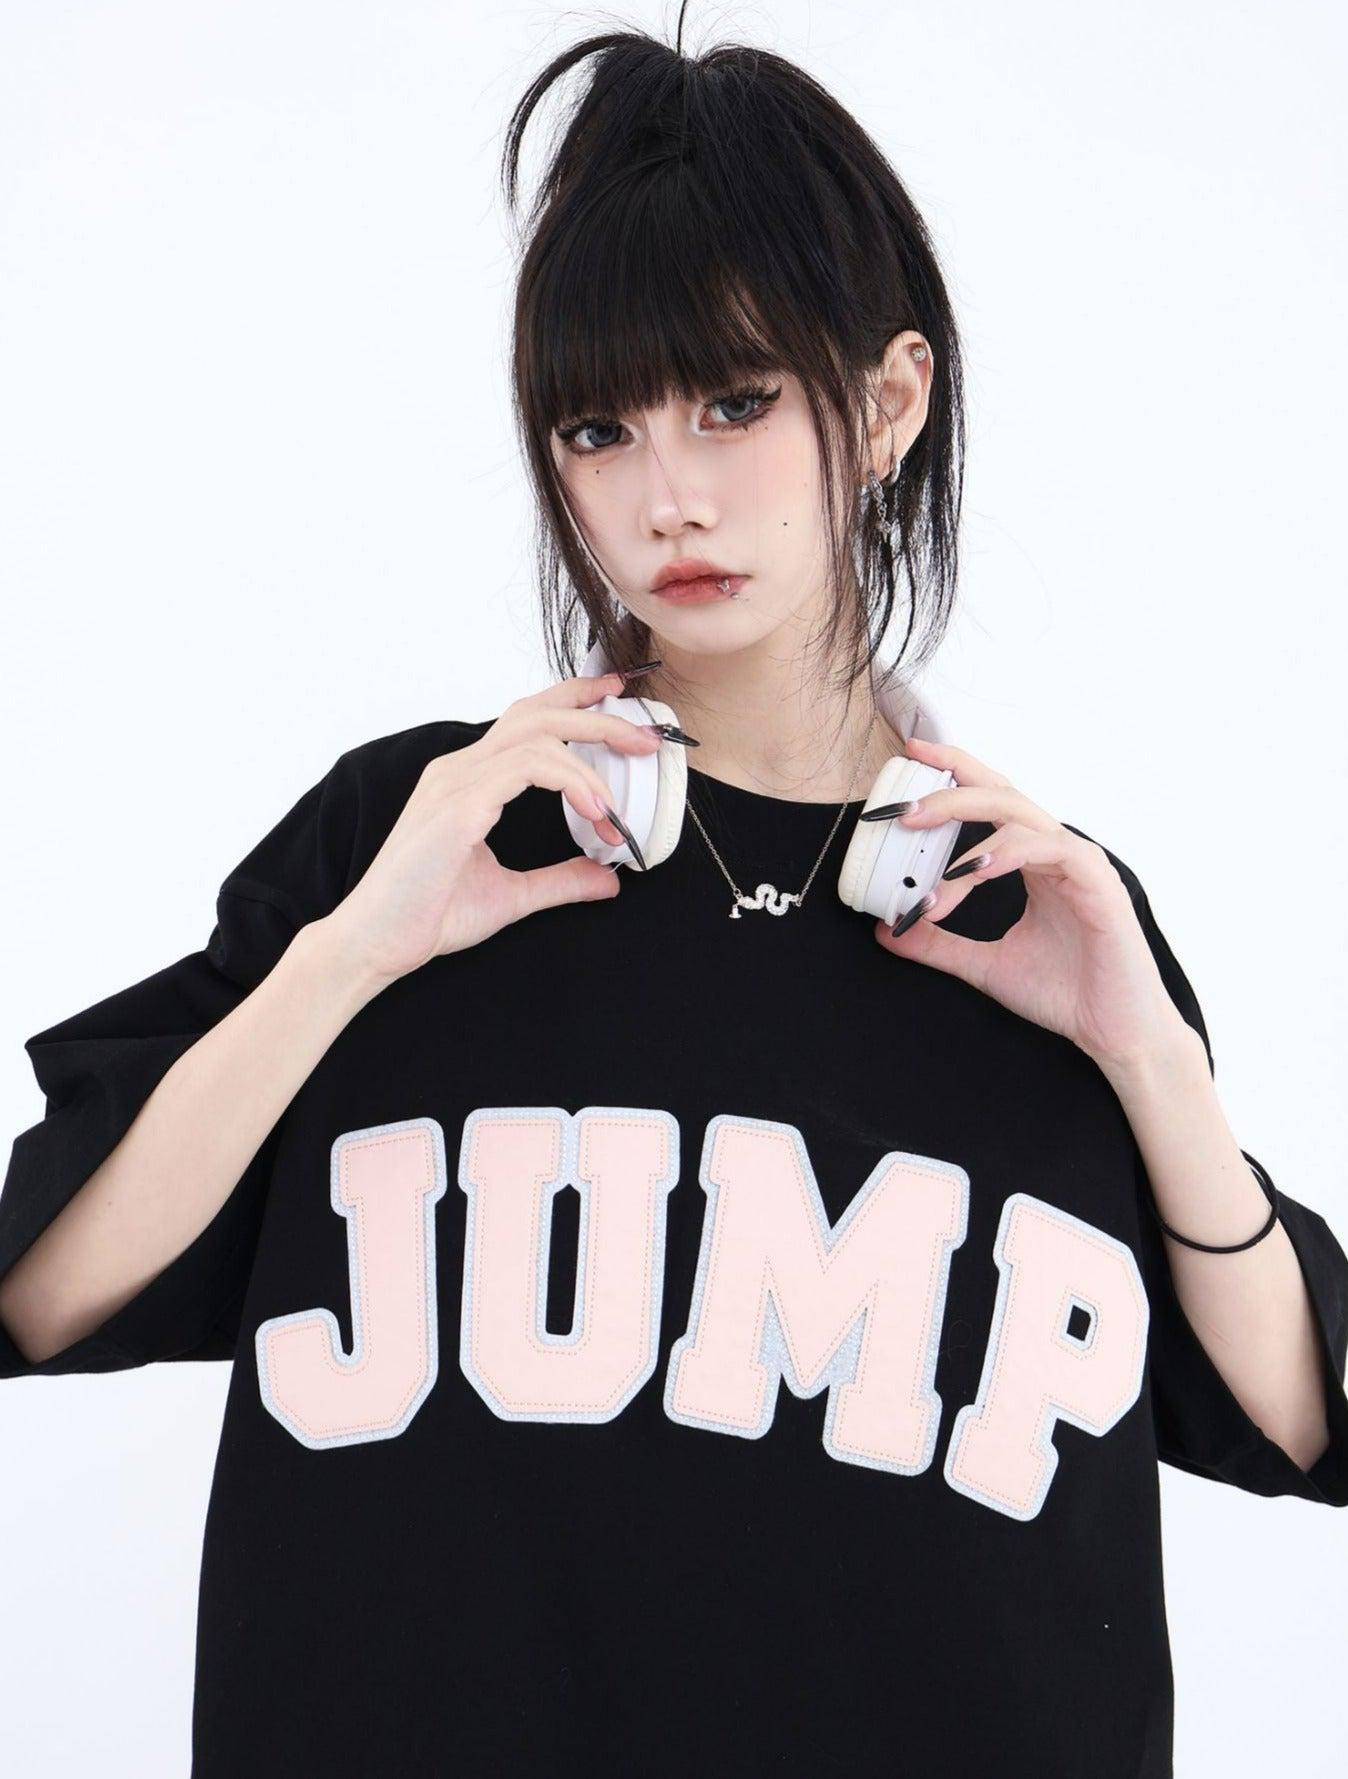 Leather Logo Embroidered T-Shirt Korean Street Fashion T-Shirt By Jump Next Shop Online at OH Vault